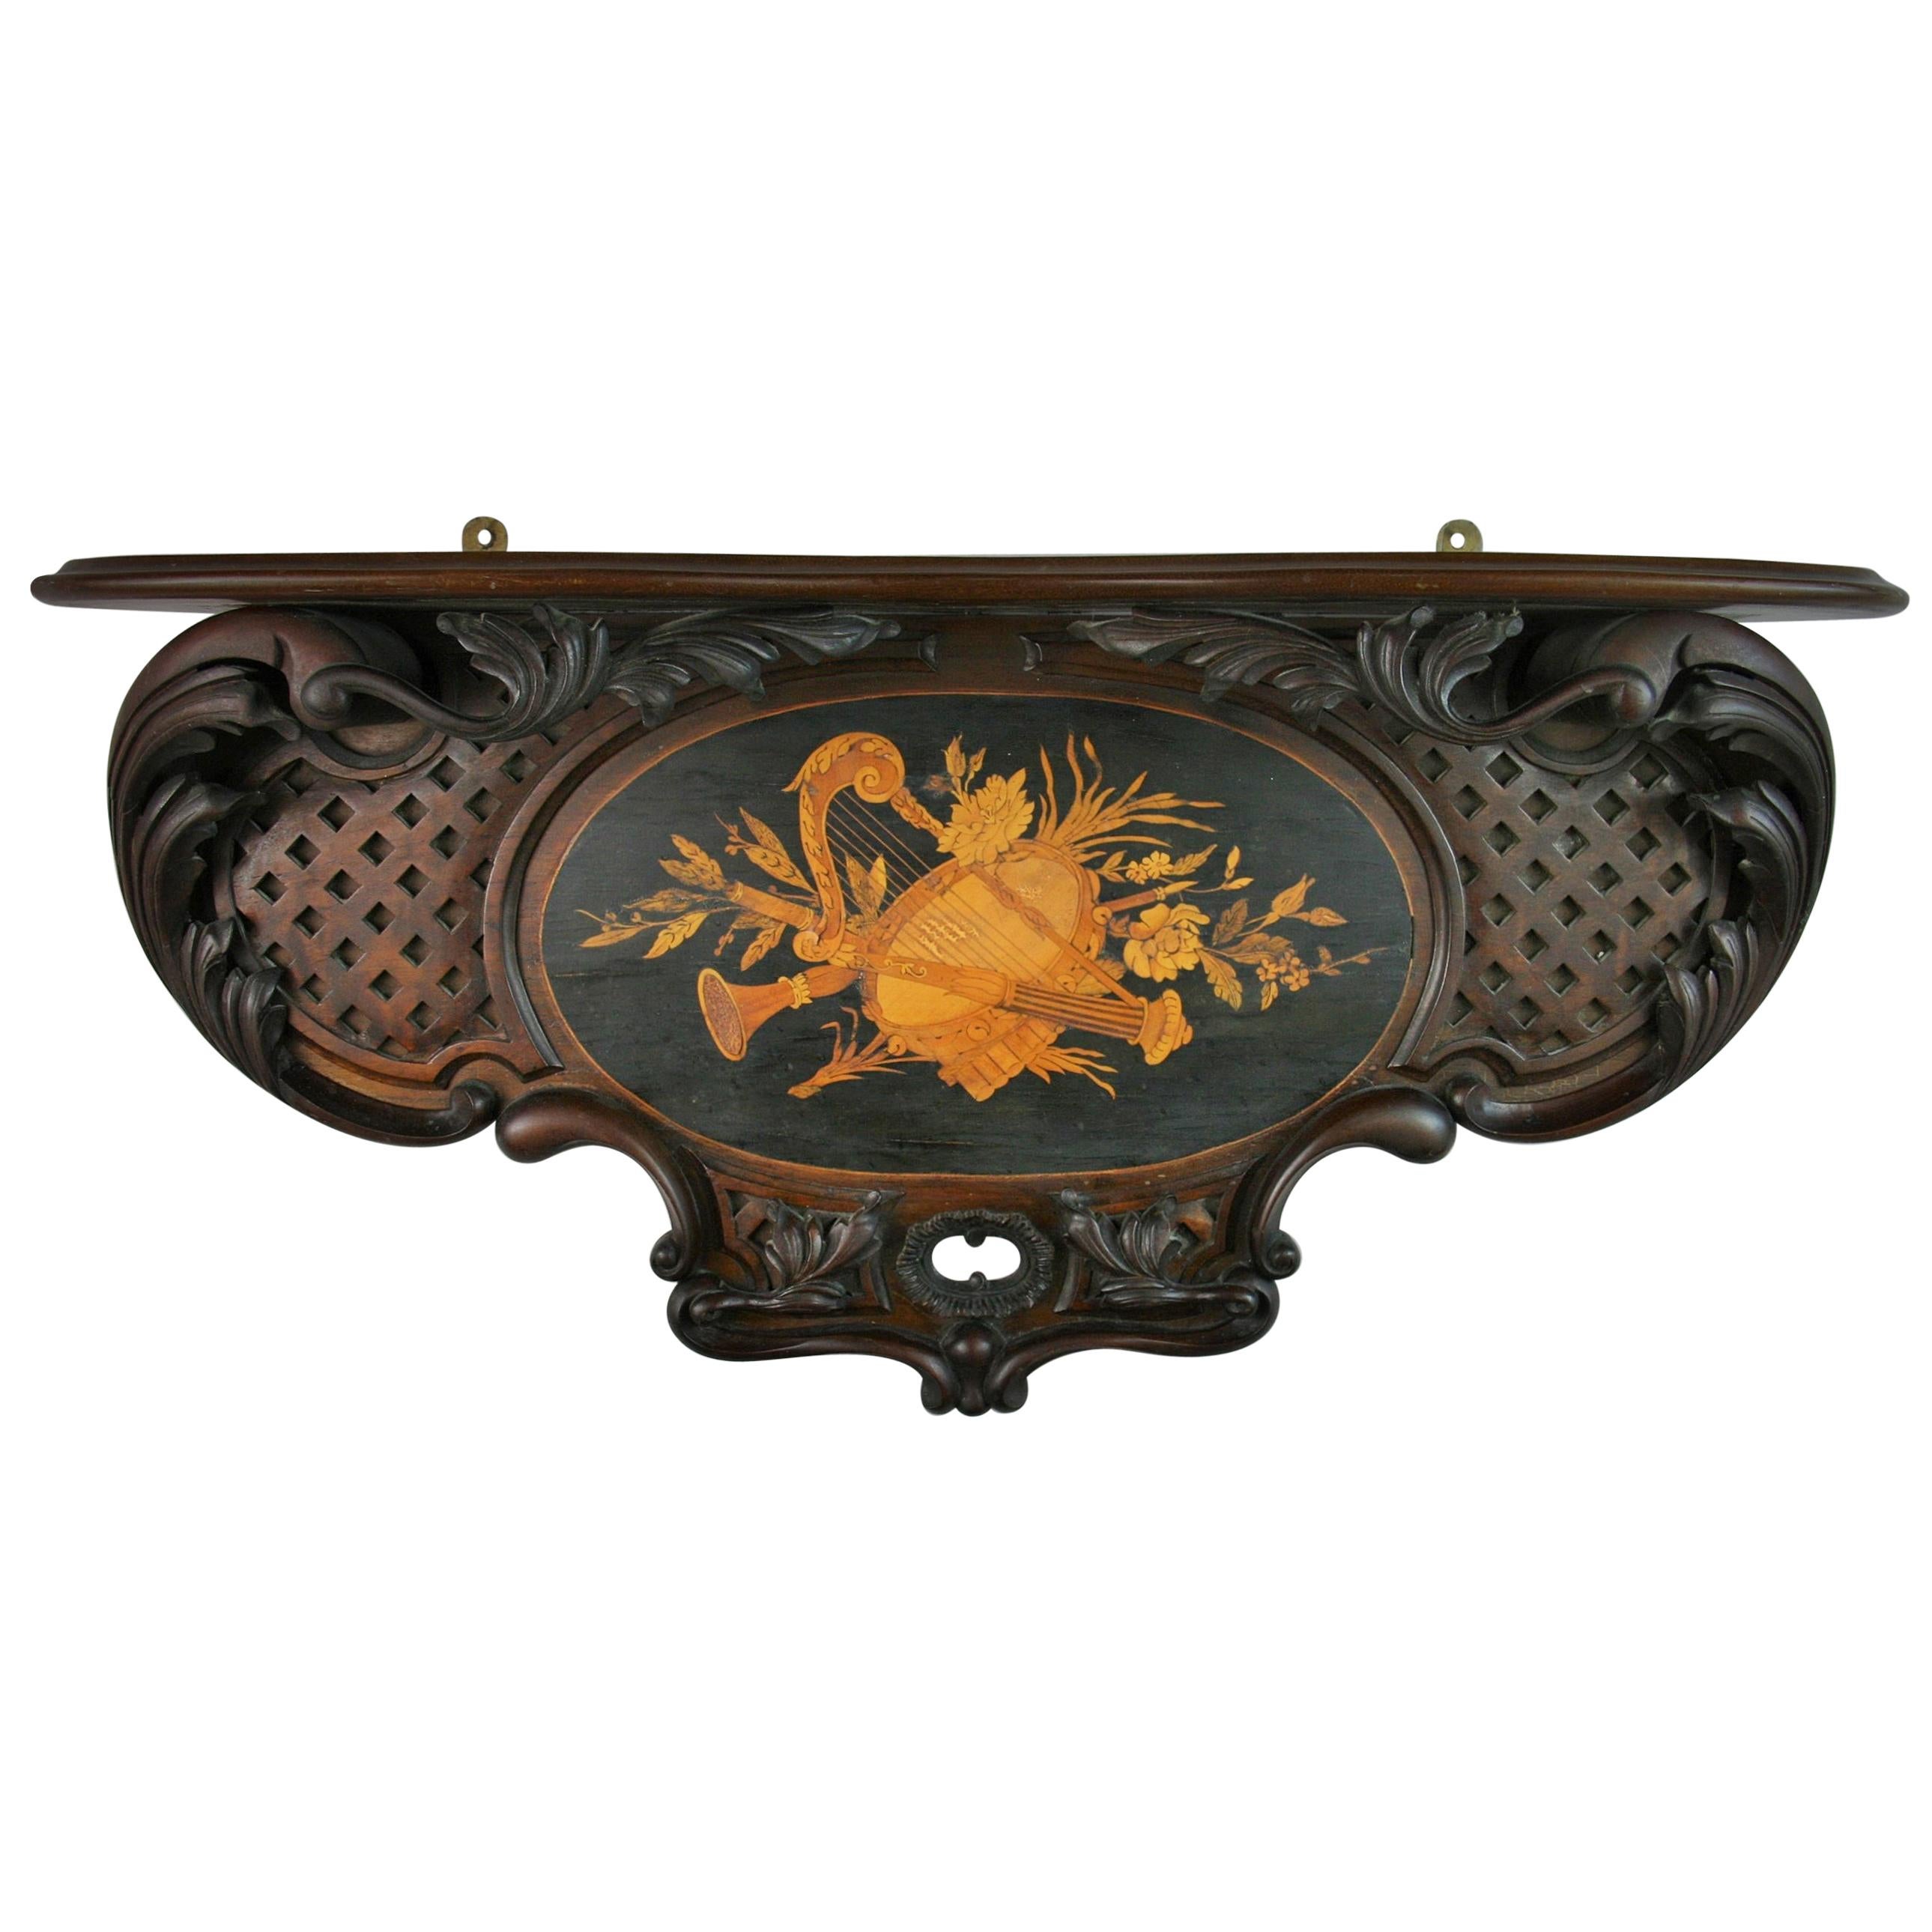 Italian Hand Carved Walnut Wood Shelf with Musical Inlay, Late 19th Century For Sale